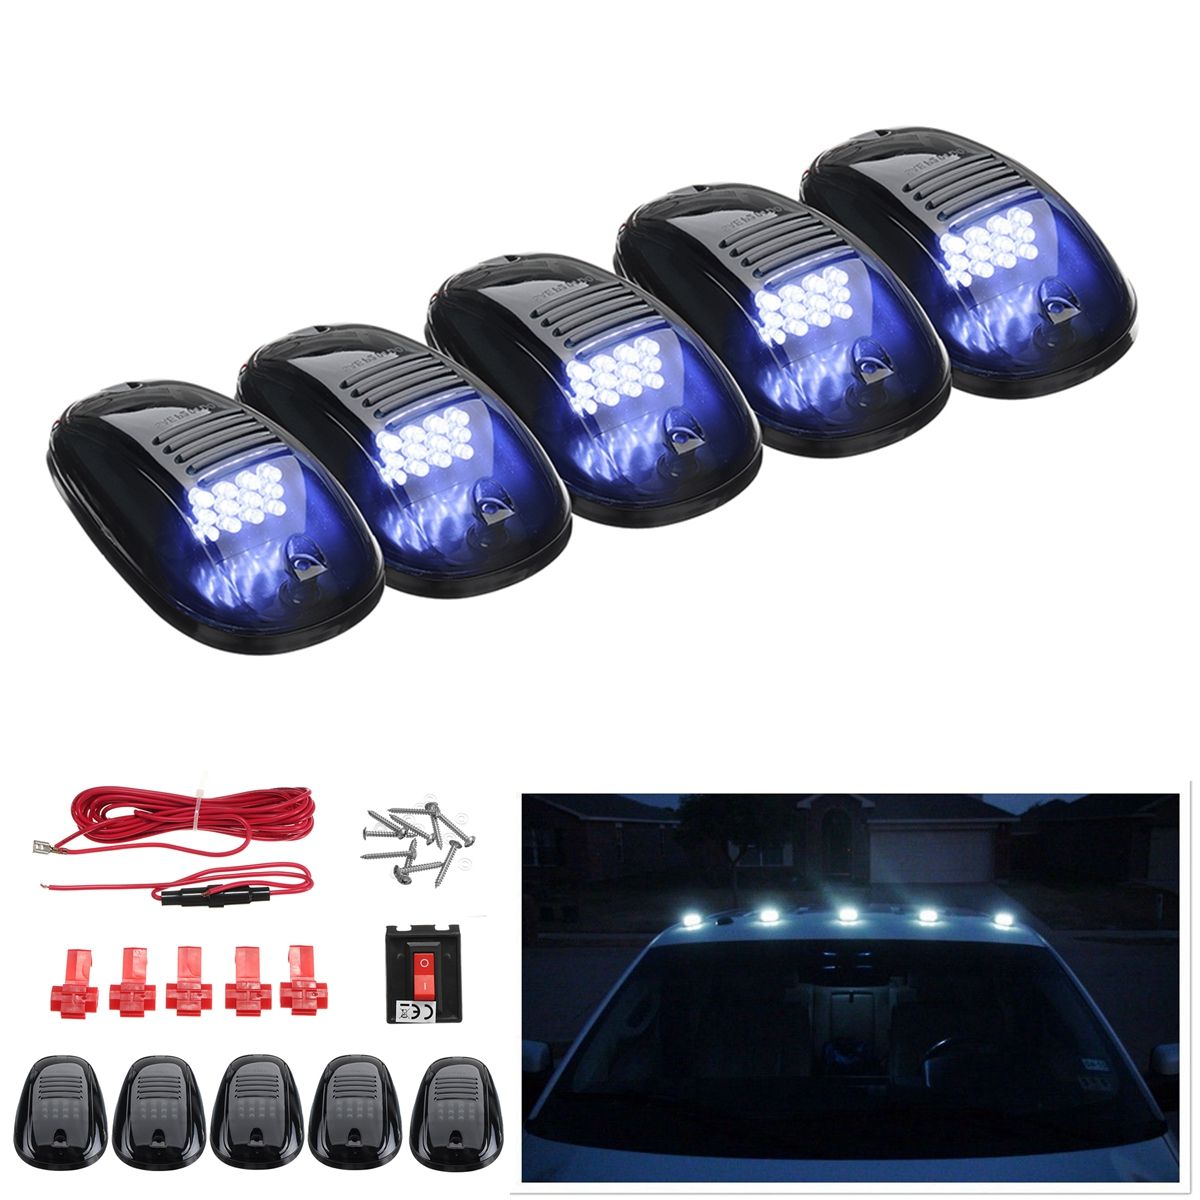 5PCS-Smoked-Cab-Roof-Top-White-LED-Marker-Running-Light-Clearance-Truck-SUV-RV-4X4-1716272